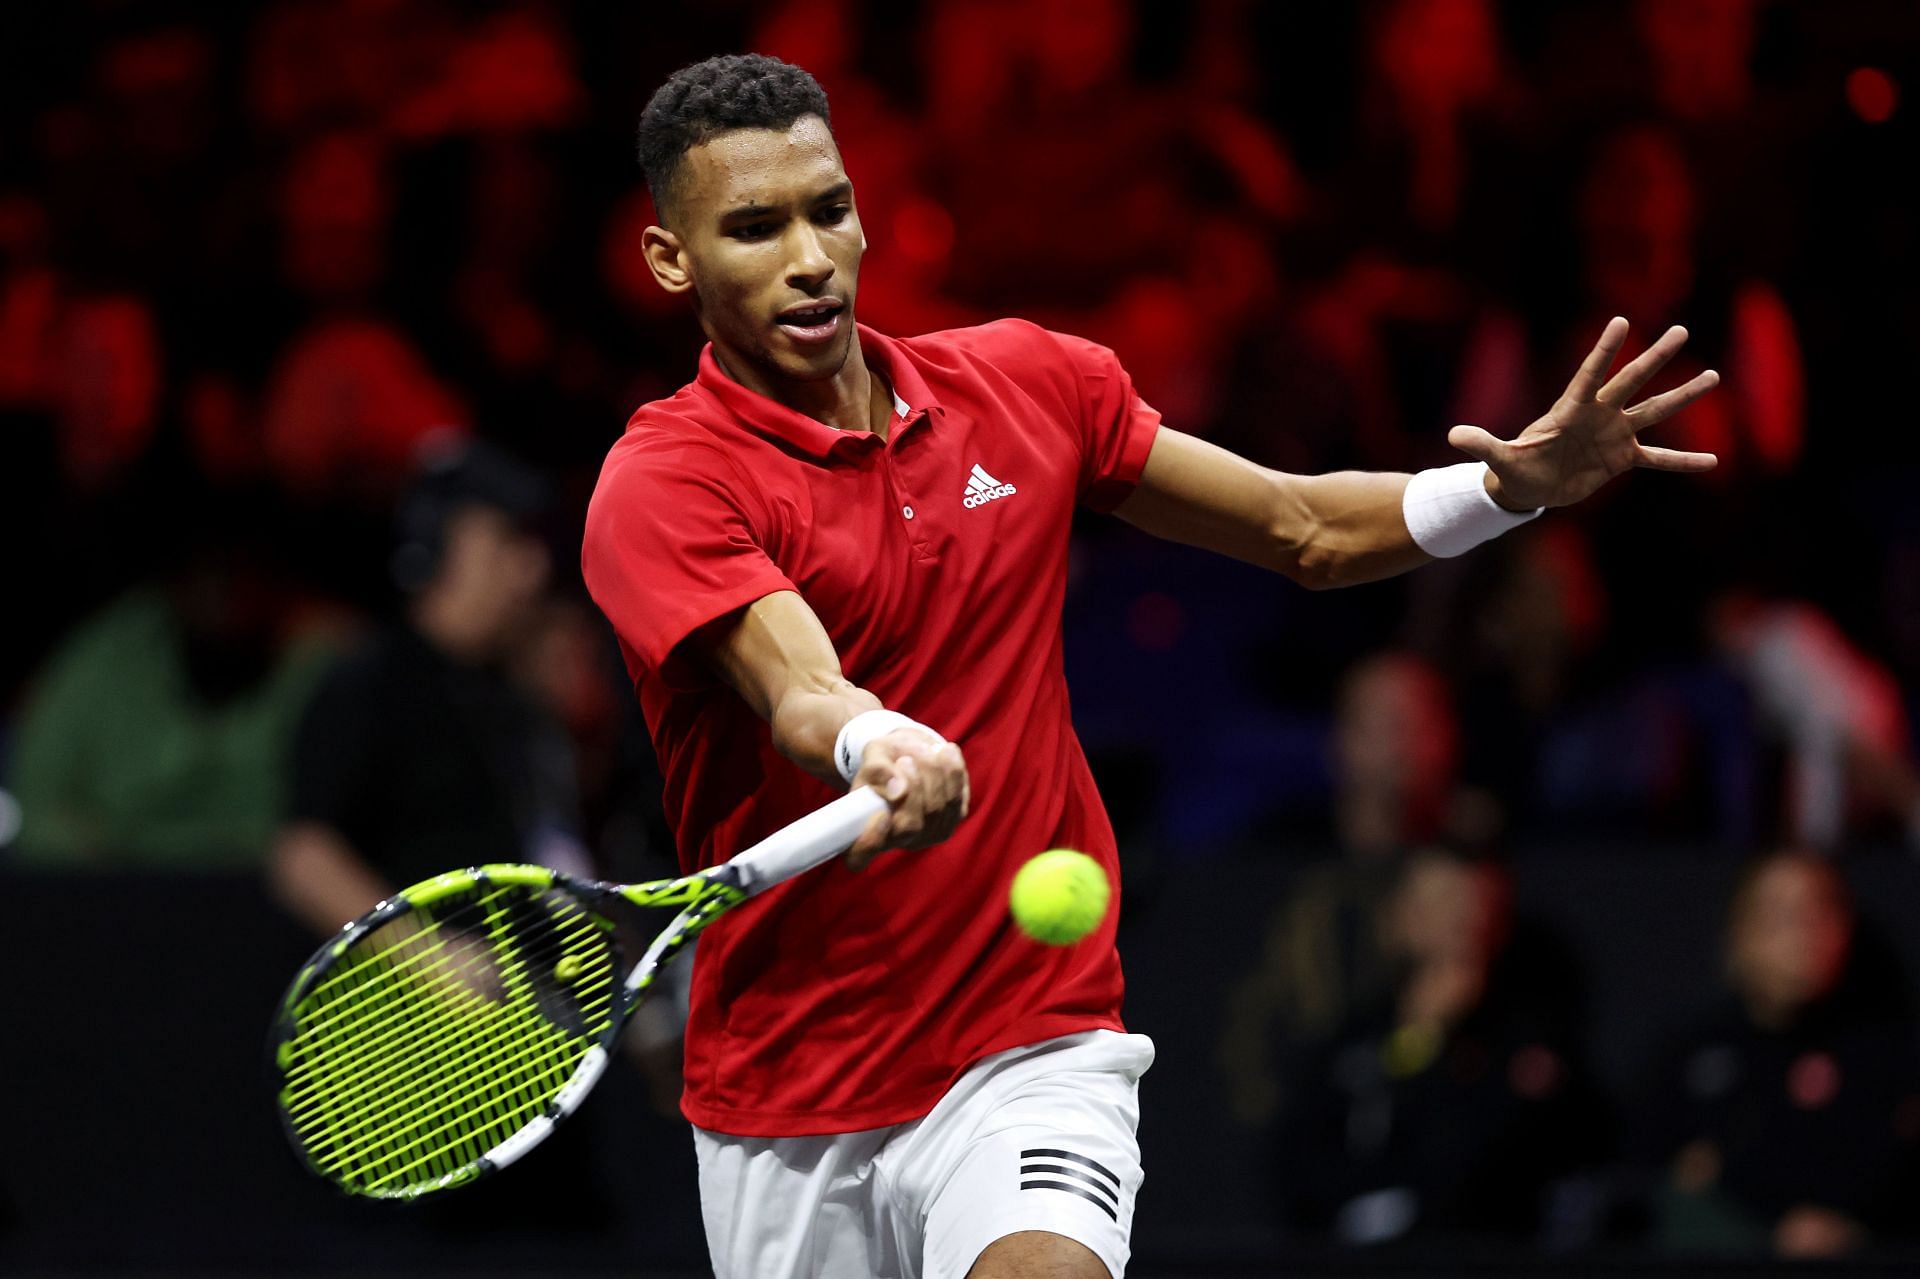 Felix Auger-Aliassime in action at the 2022 Laver Cup.